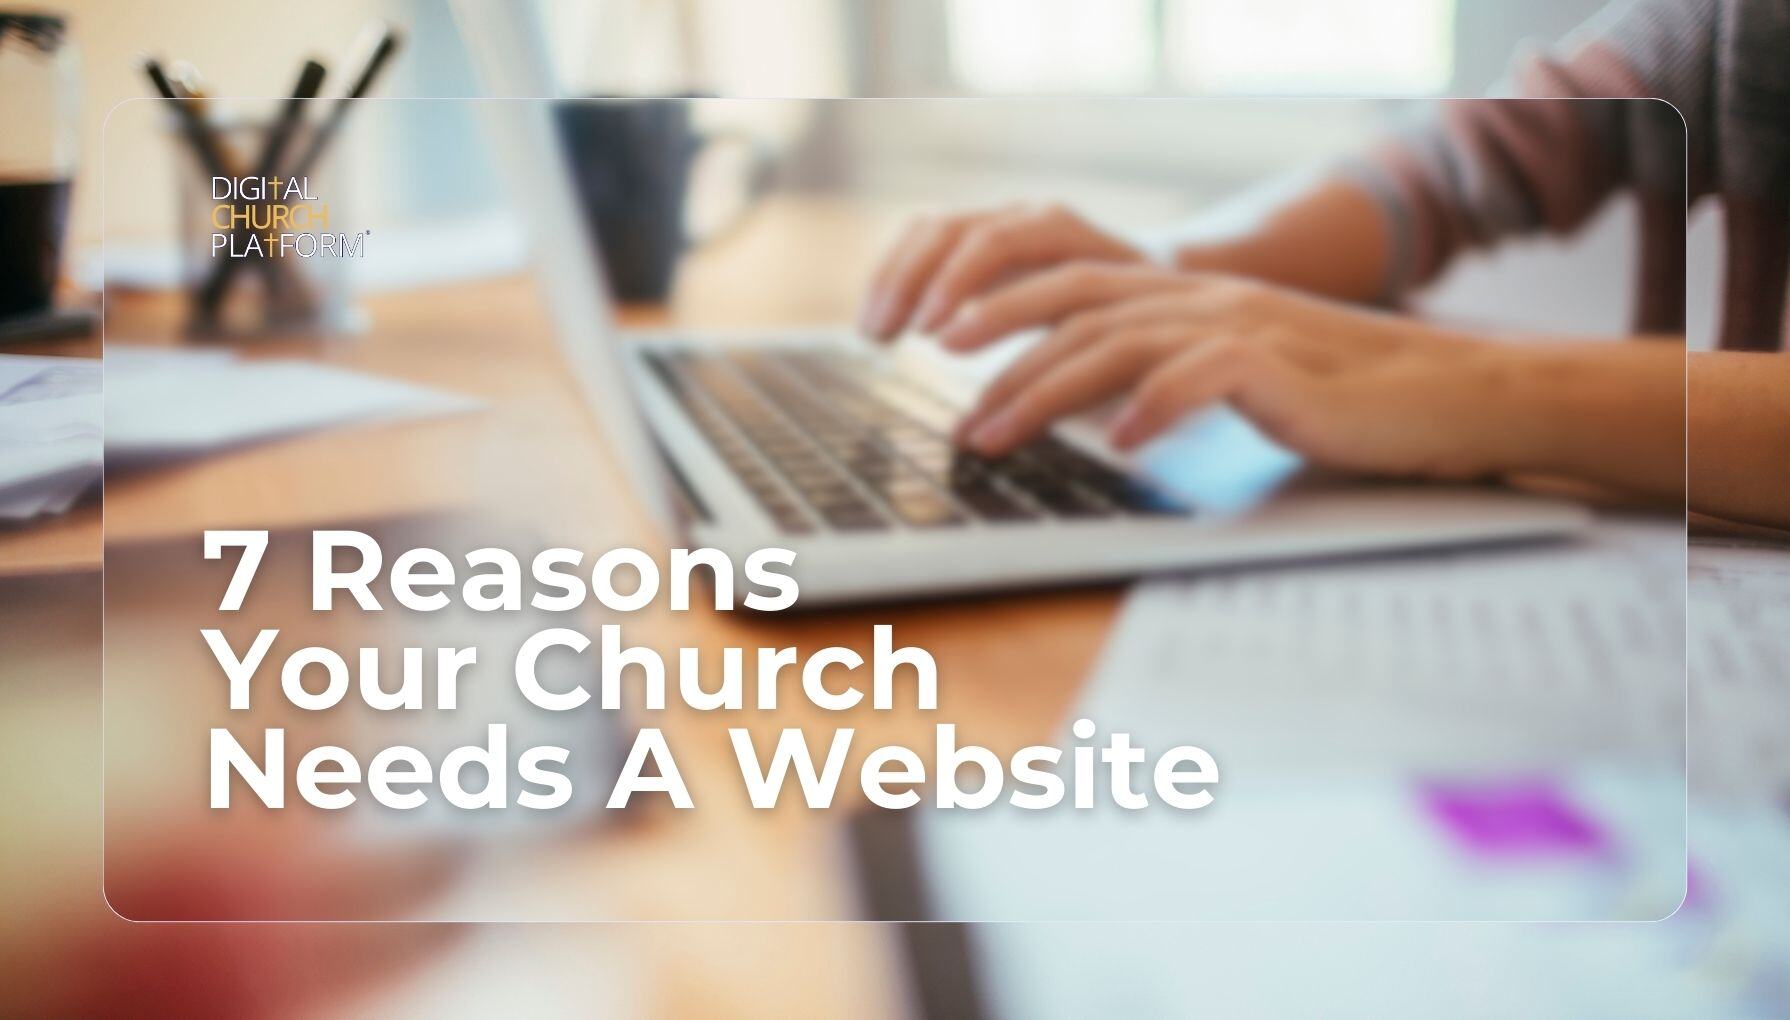 7 Reasons Your Church Needs a Website